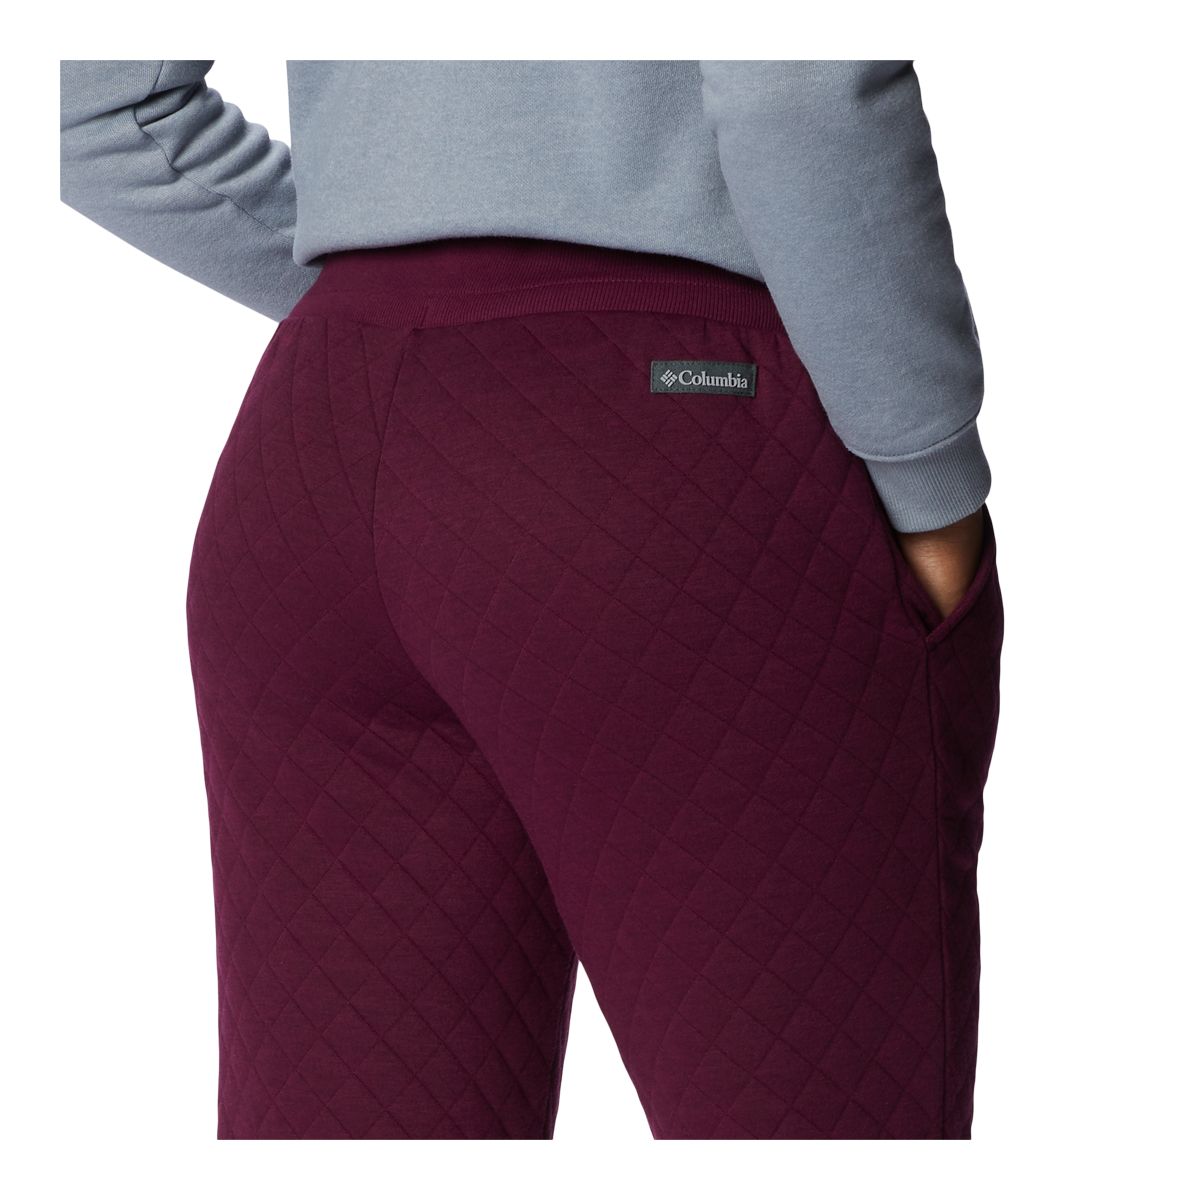 https://media-www.sportchek.ca/product/div-03-softgoods/dpt-72-casual-clothing/sdpt-02-womens/333860196/columbia-women-s-lodge-quilted-jogger-pants-outdoor-stretch-6bd1b545-3da7-48c2-b97a-316a08bf7dba-jpgrendition.jpg?imdensity=1&imwidth=1244&impolicy=mZoom